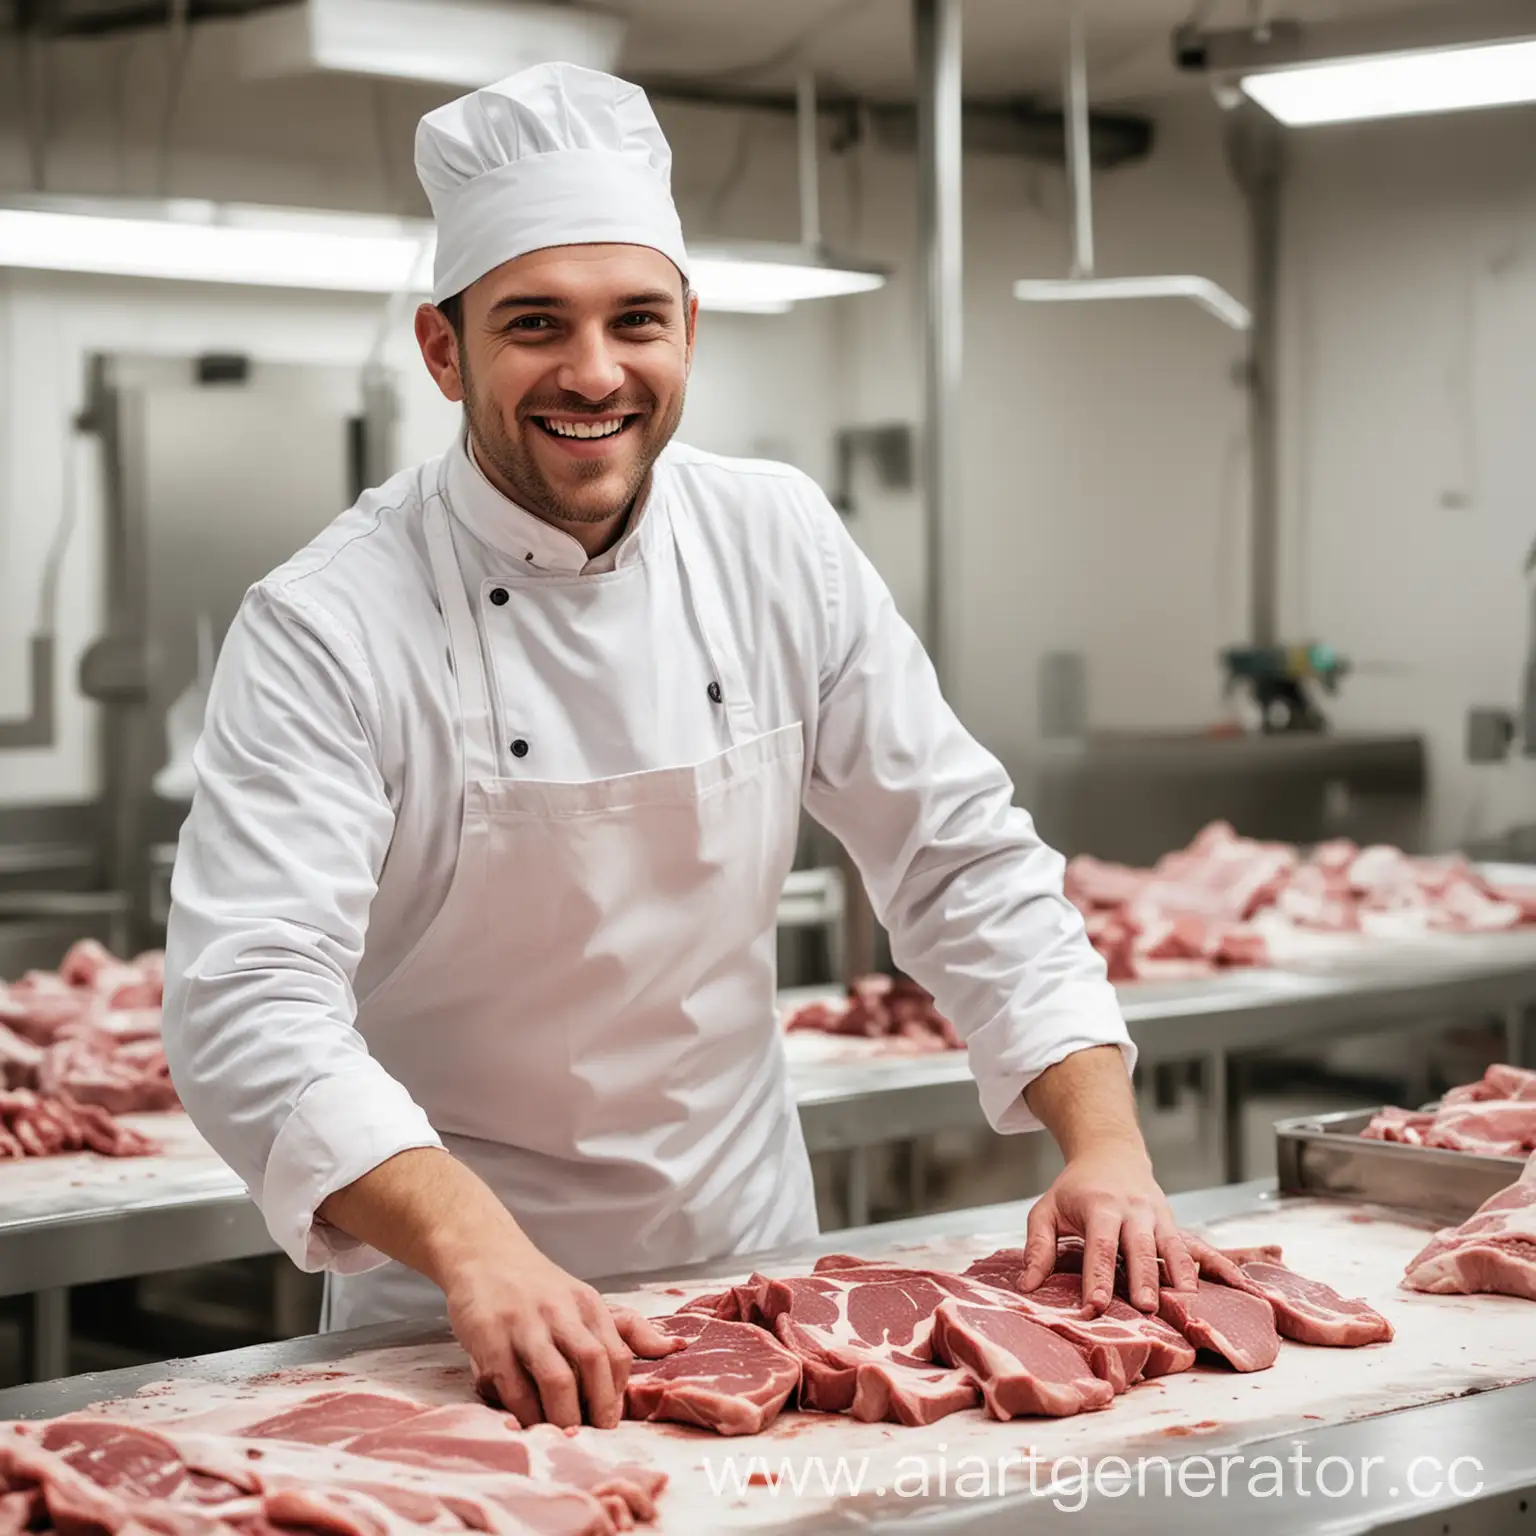 Smiling-Butcher-Expertly-Trimming-Meat-in-Hygienic-Modern-Facility